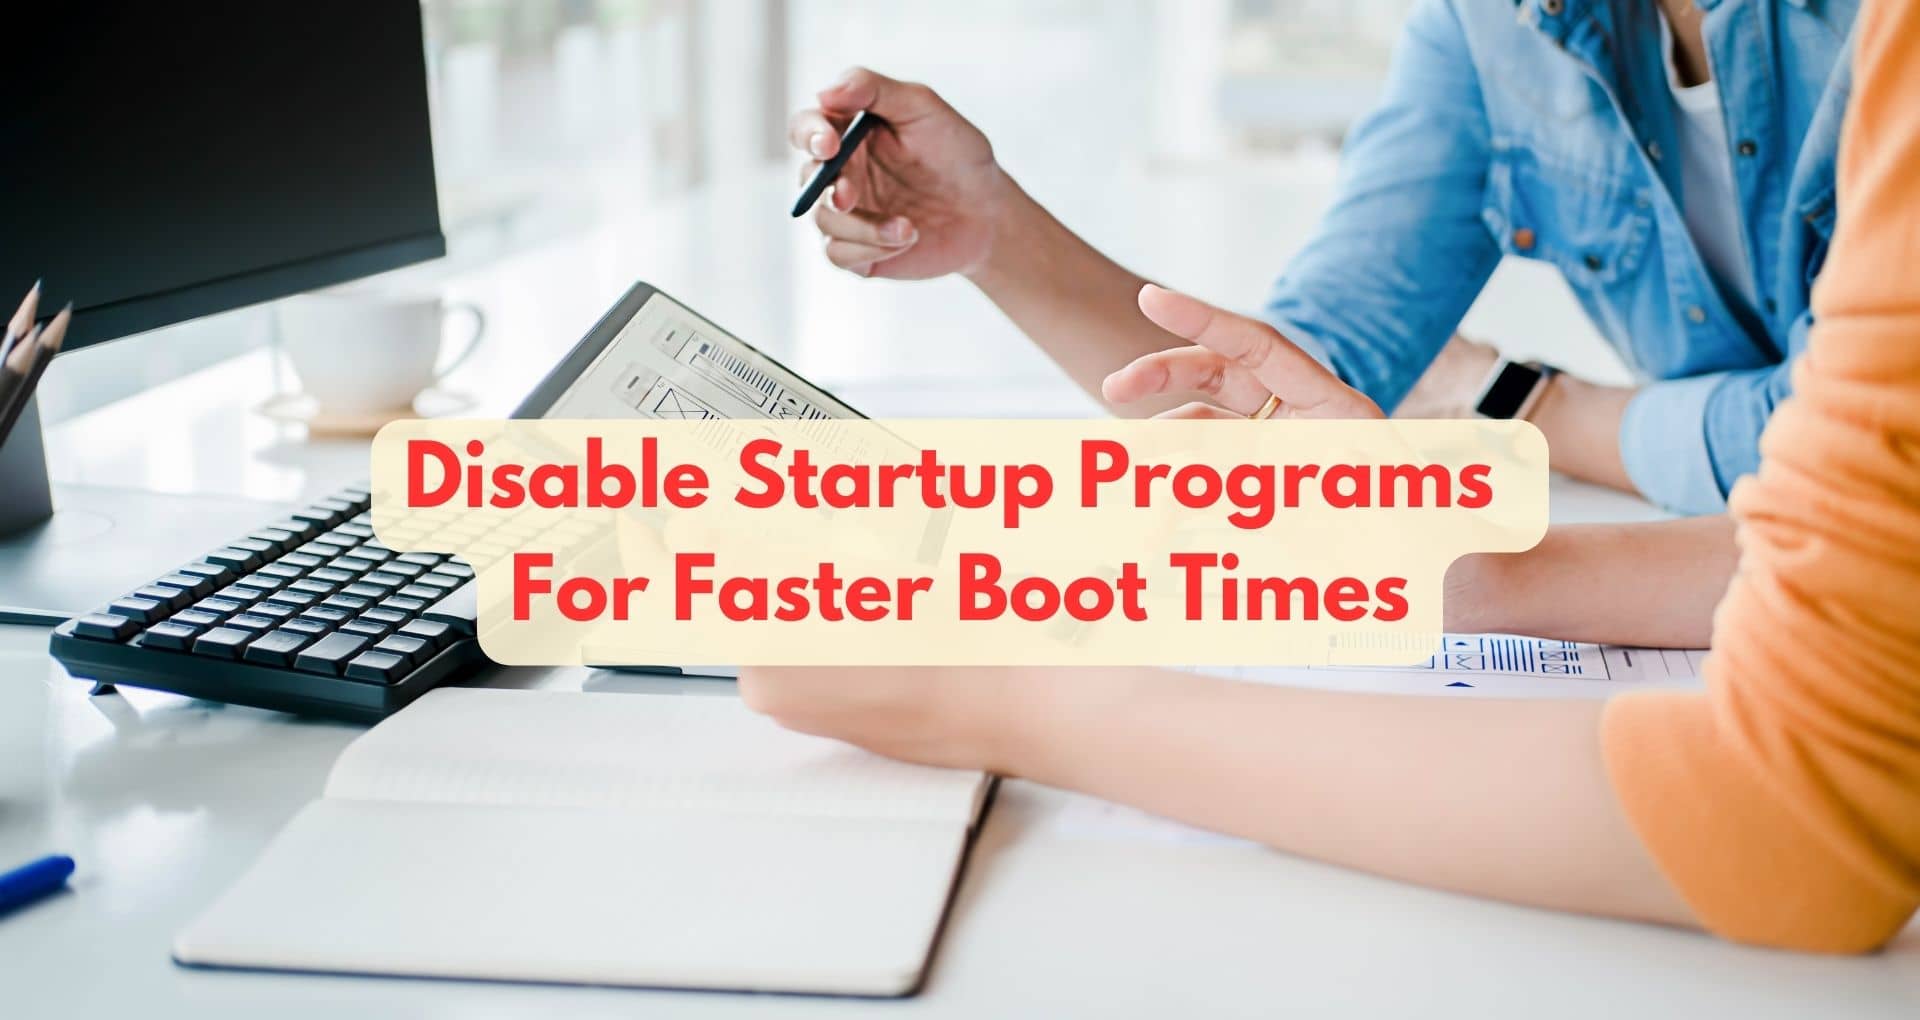 How To Disable Startup Programs For Faster Boot Times?